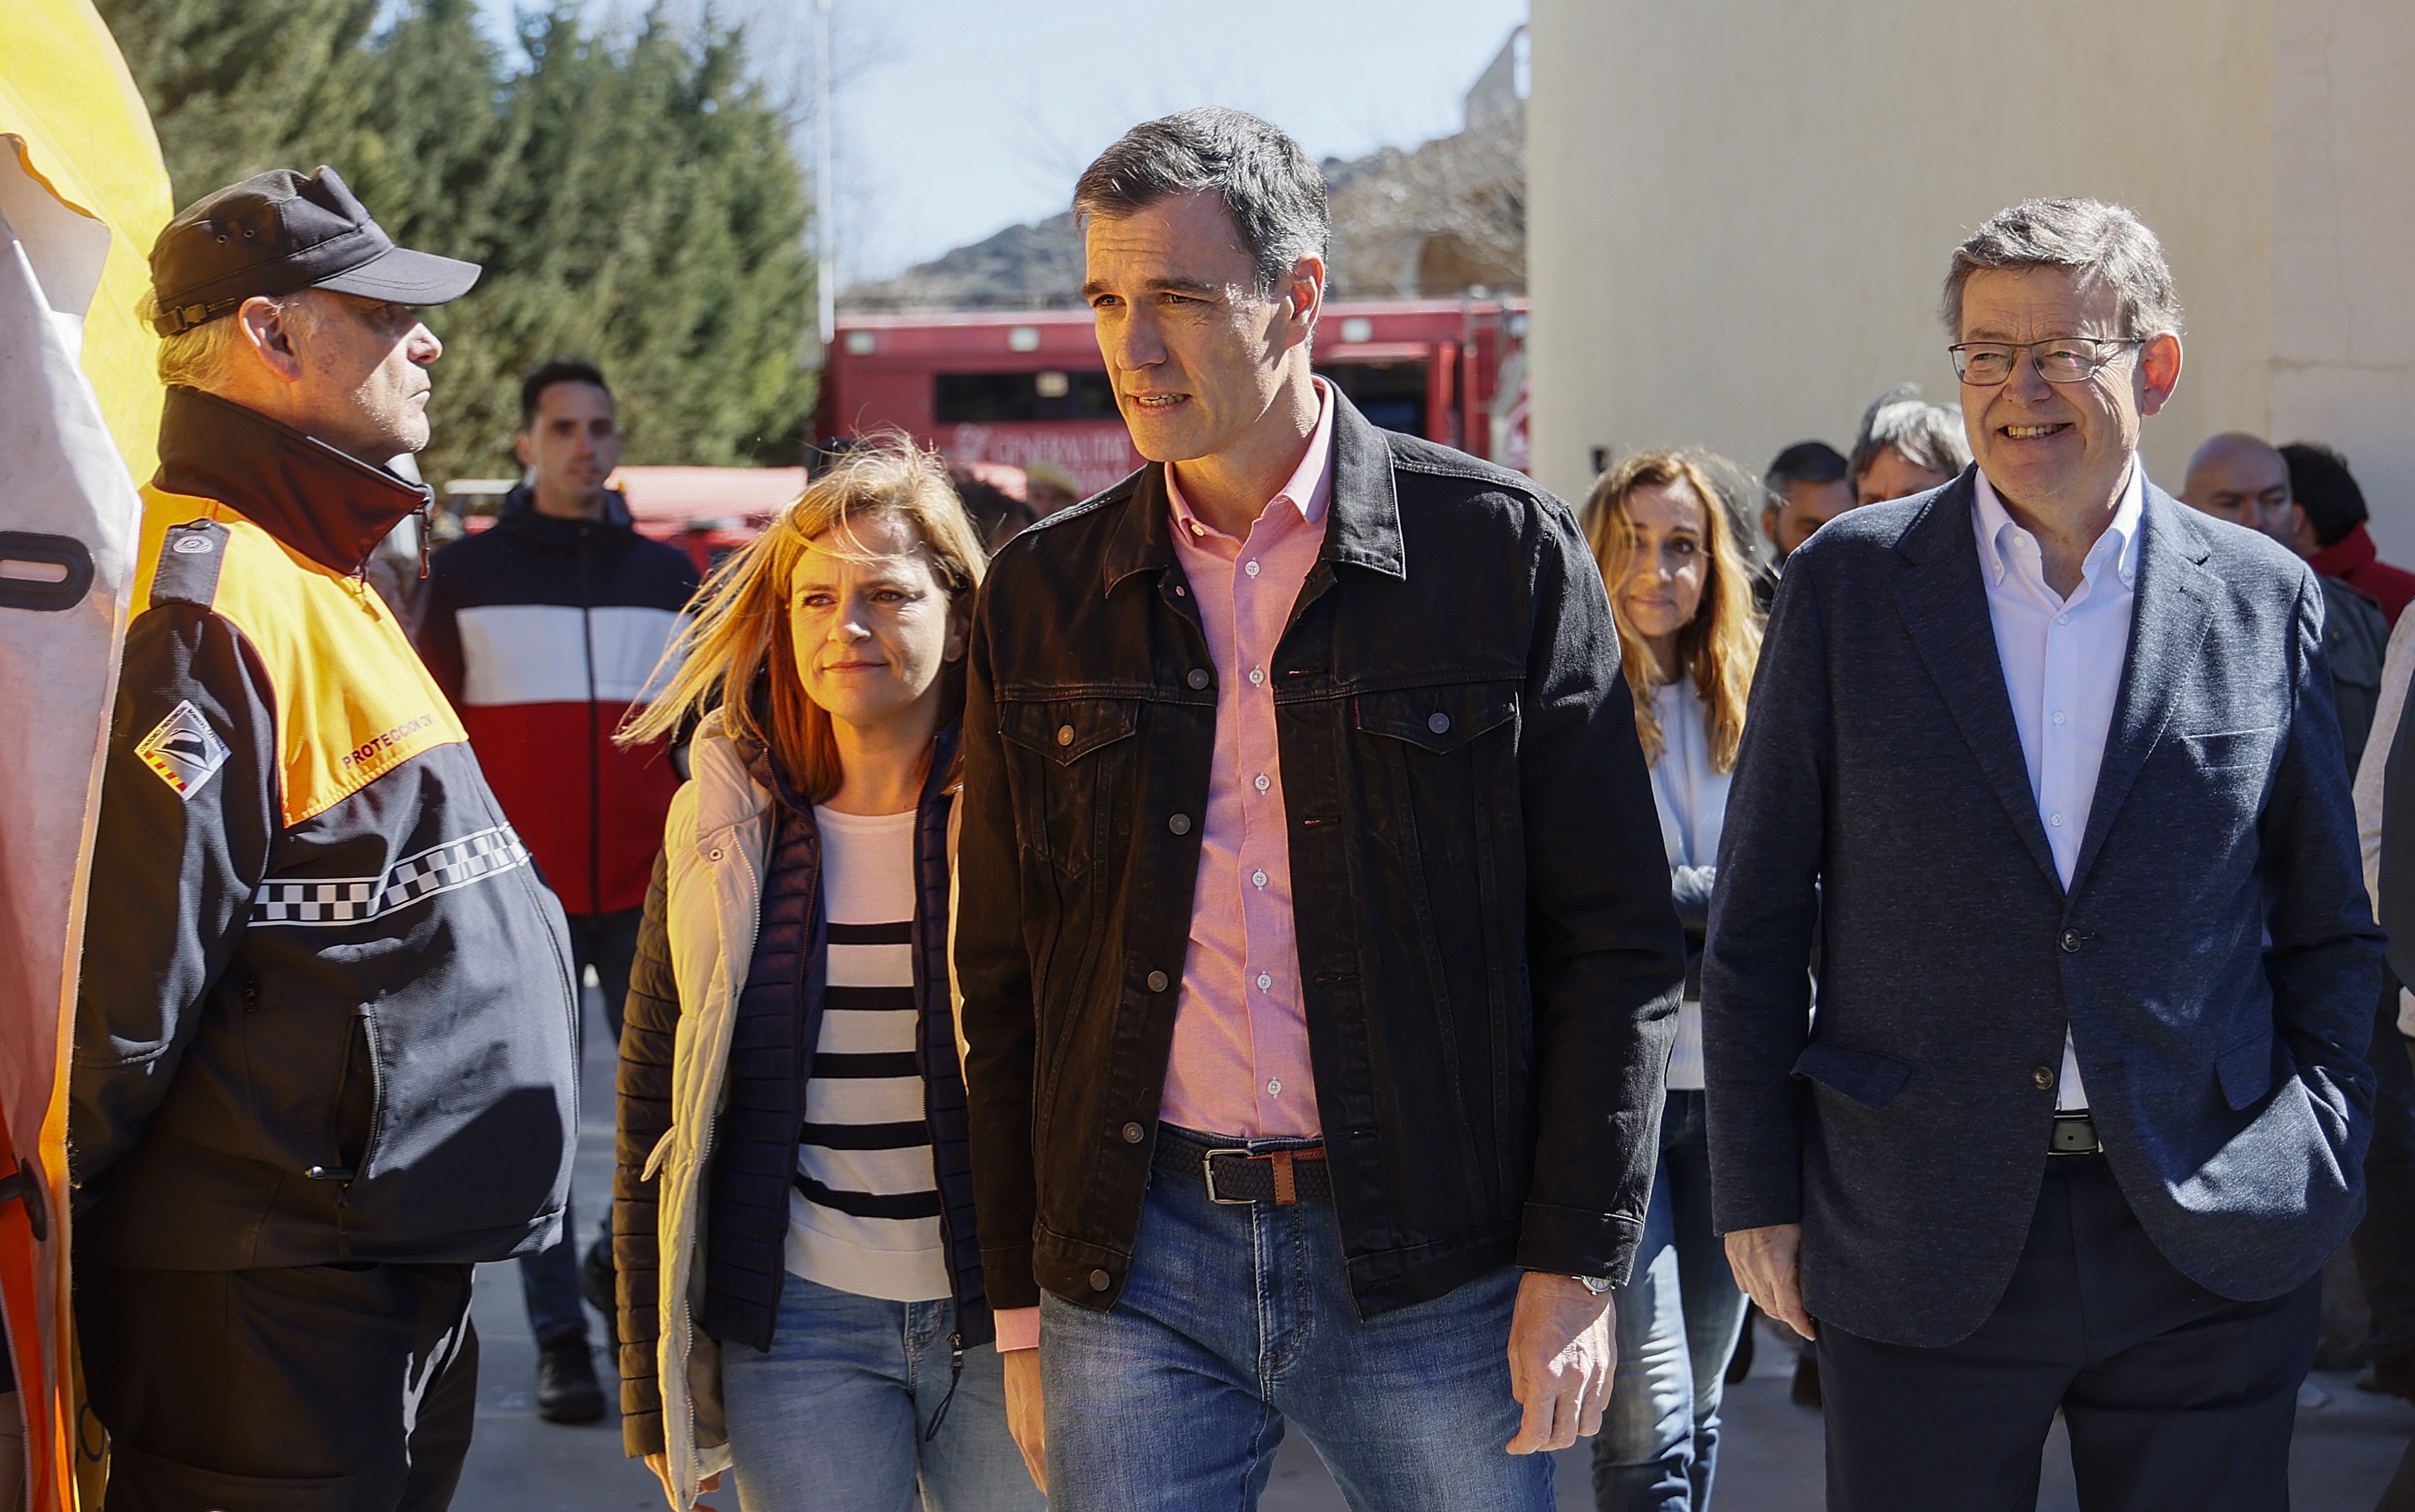 The Government delegate in the Valencian Community, Pilar Bernabé;  the President of the Government, Pedro Sánchez, and the President of the Generalitat of Valencia, Ximo Puig, on arrival to visit the areas affected by the fire.